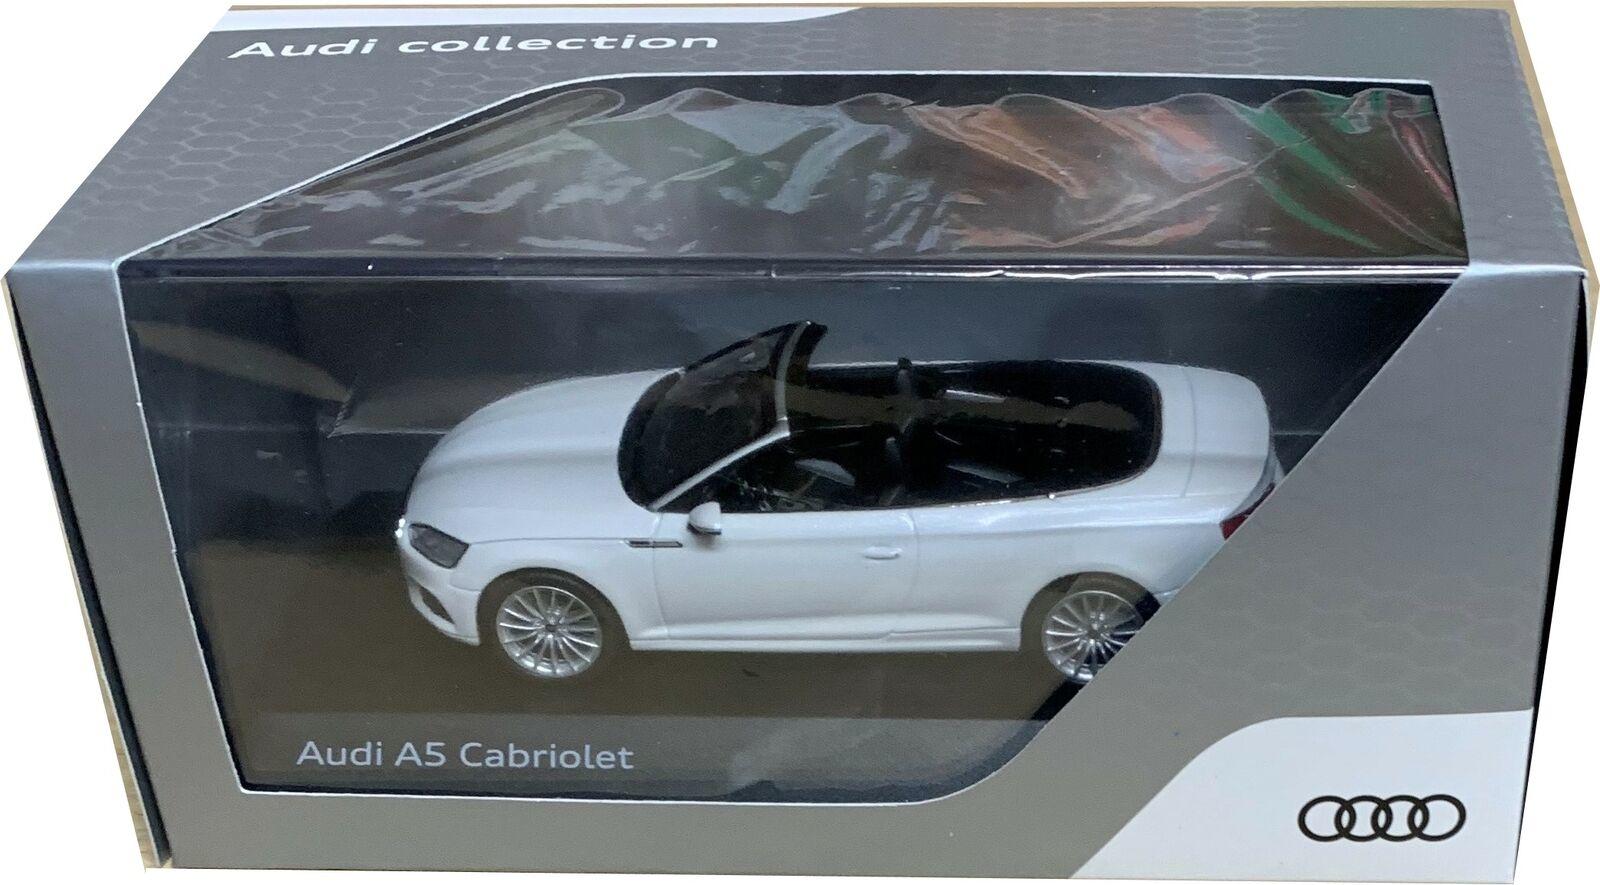 Audi A5 Cabriolet in tofana white 1:43 scale model Audi Collection, Spark